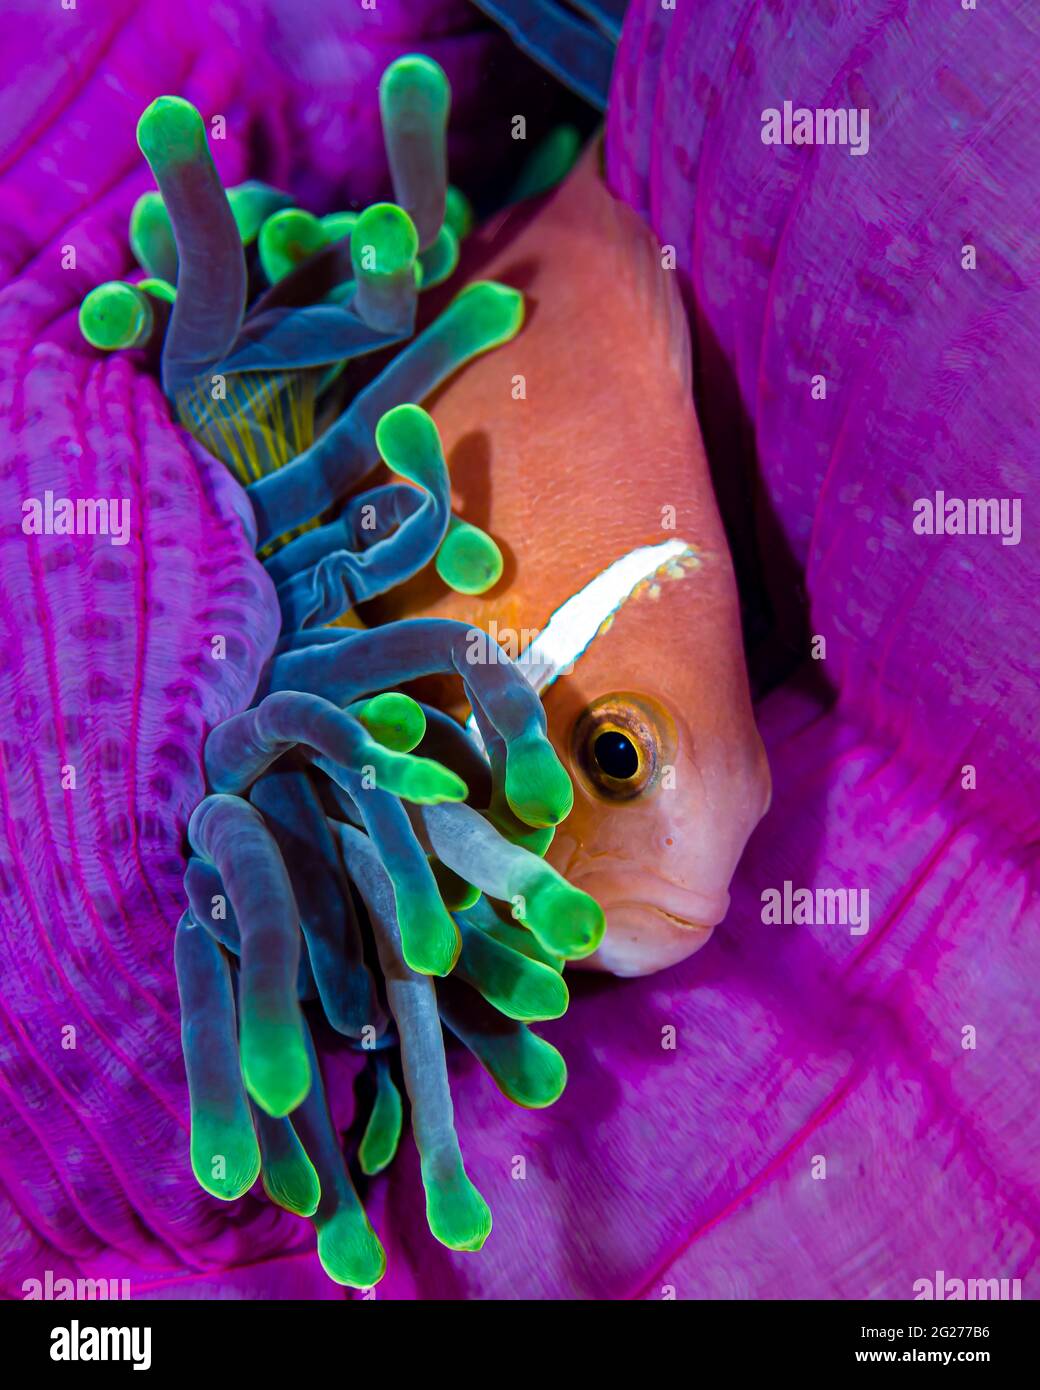 A Maldive anemonefish finding comfort in its anemone. Stock Photo